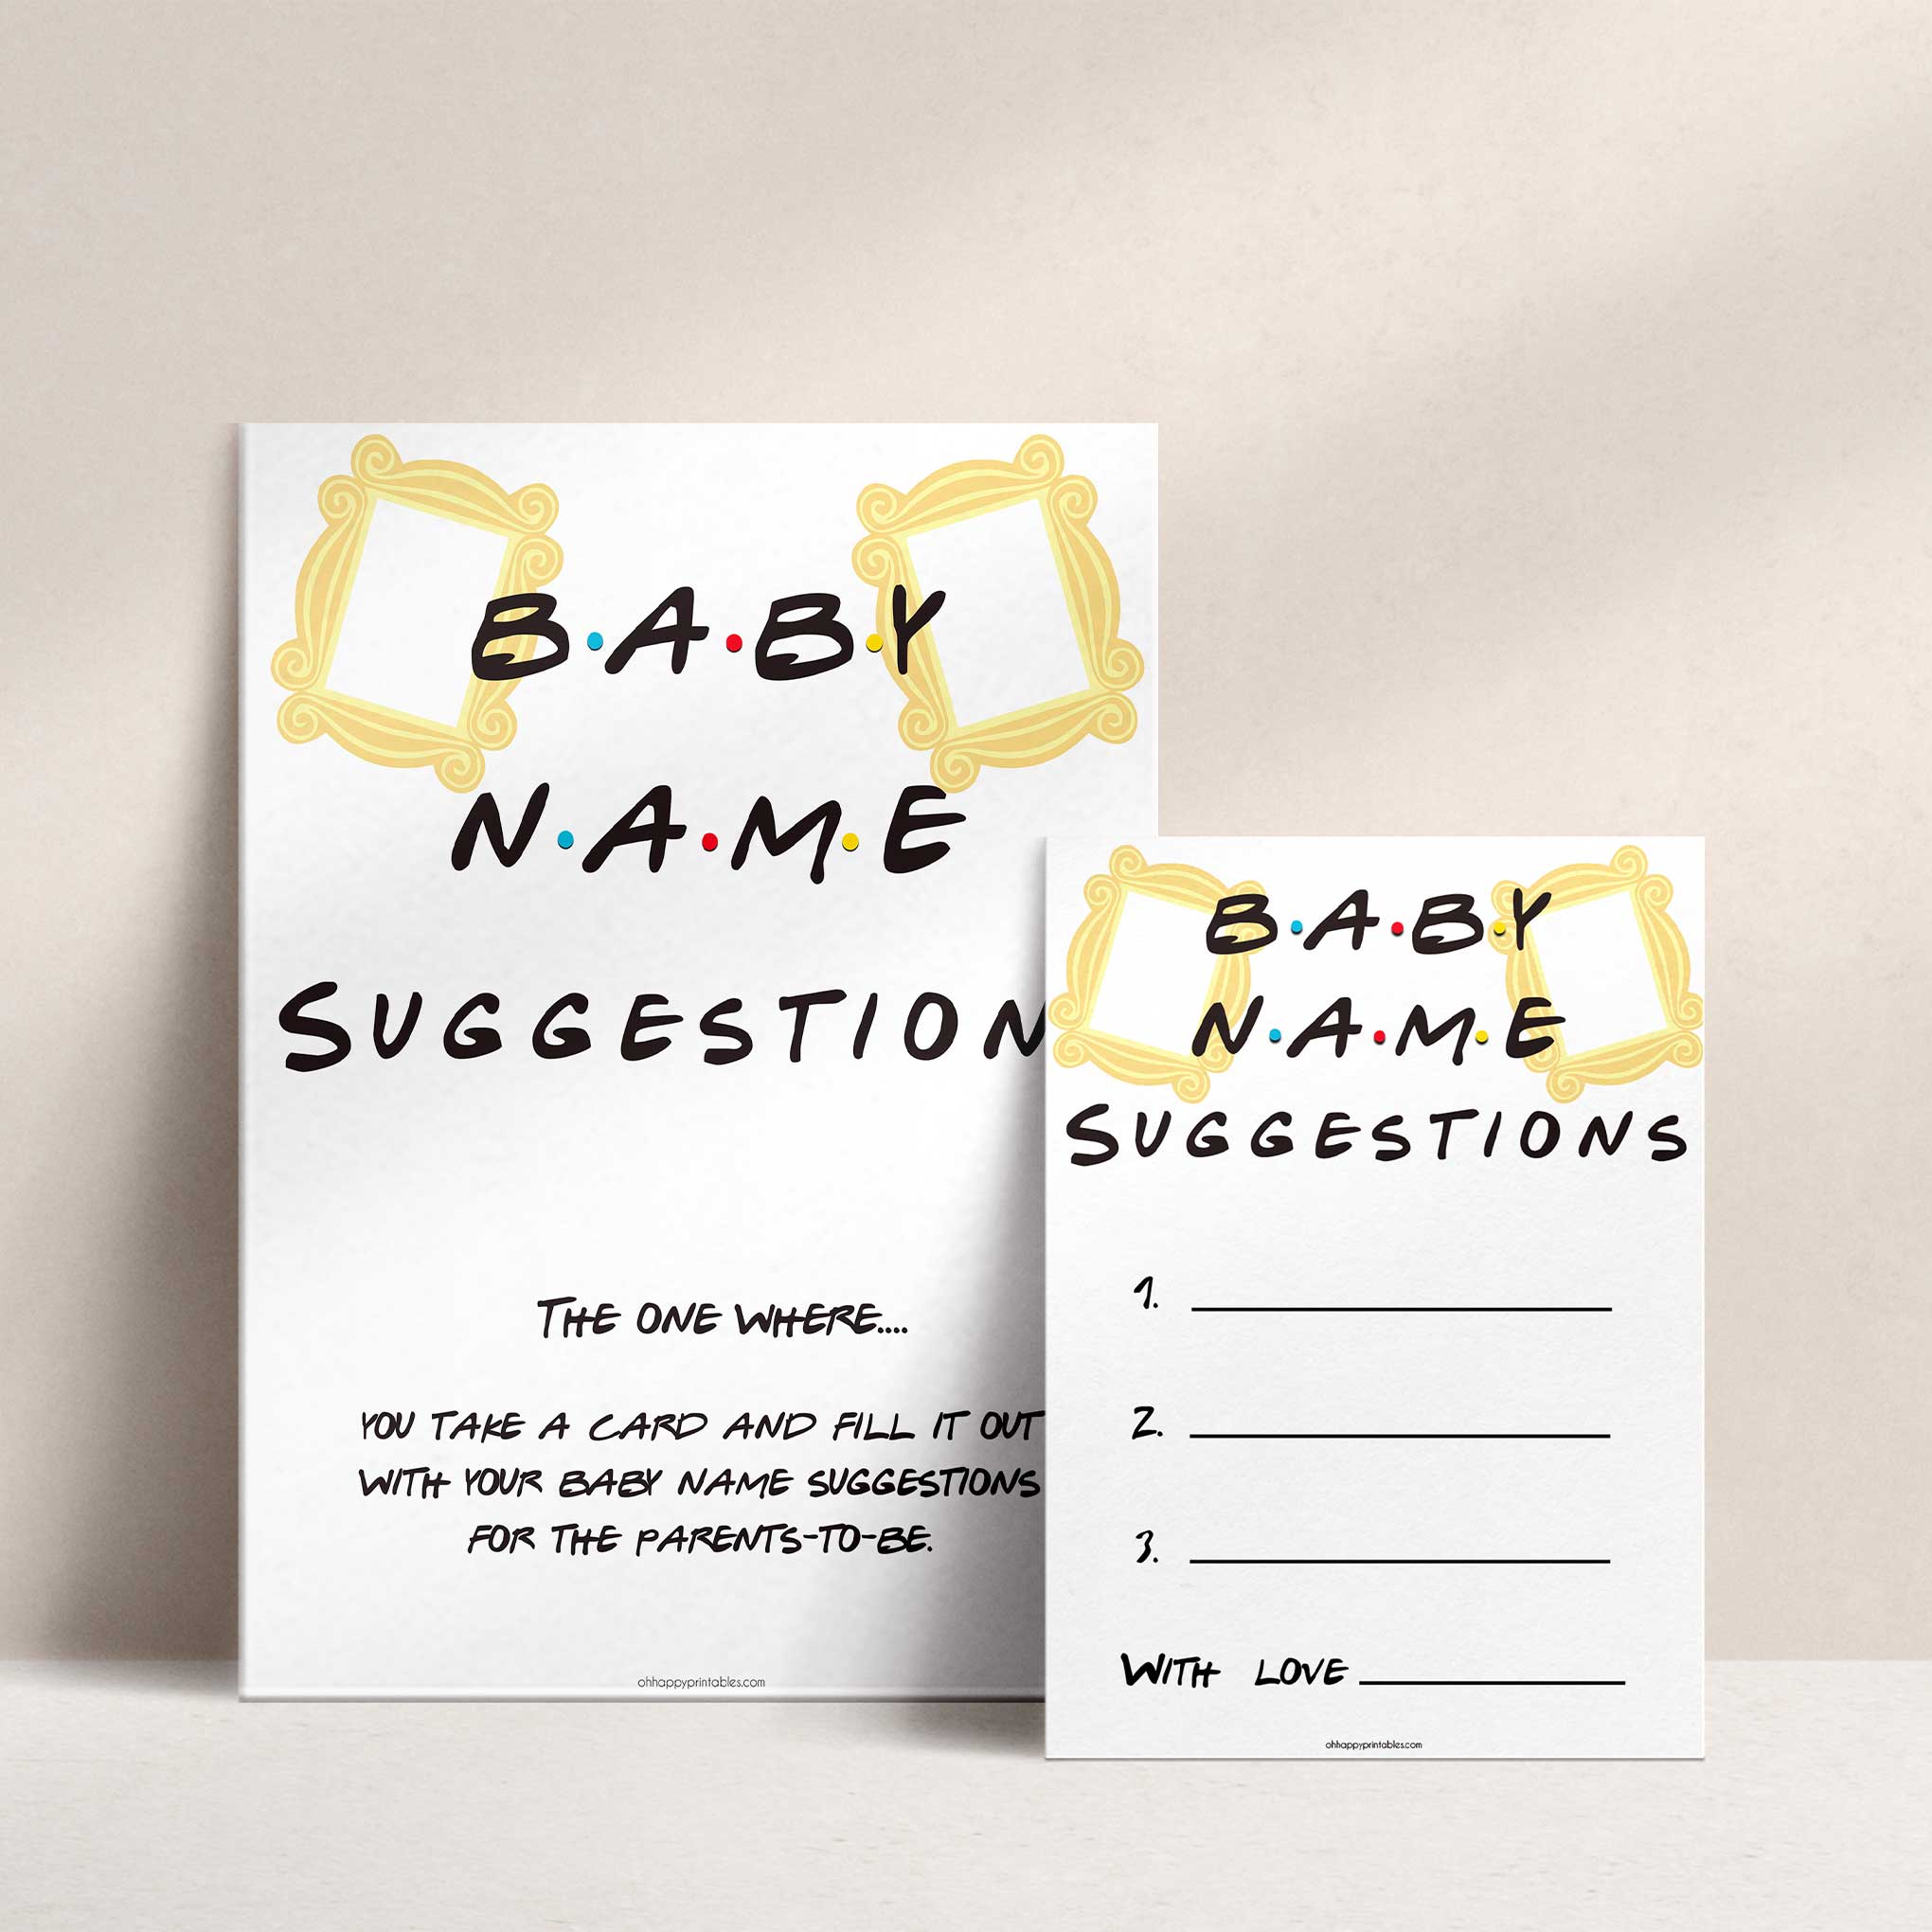 baby name suggestions, Printable baby shower games, friends fun baby games, baby shower games, fun baby shower ideas, top baby shower ideas, friends baby shower, friends baby shower ideas